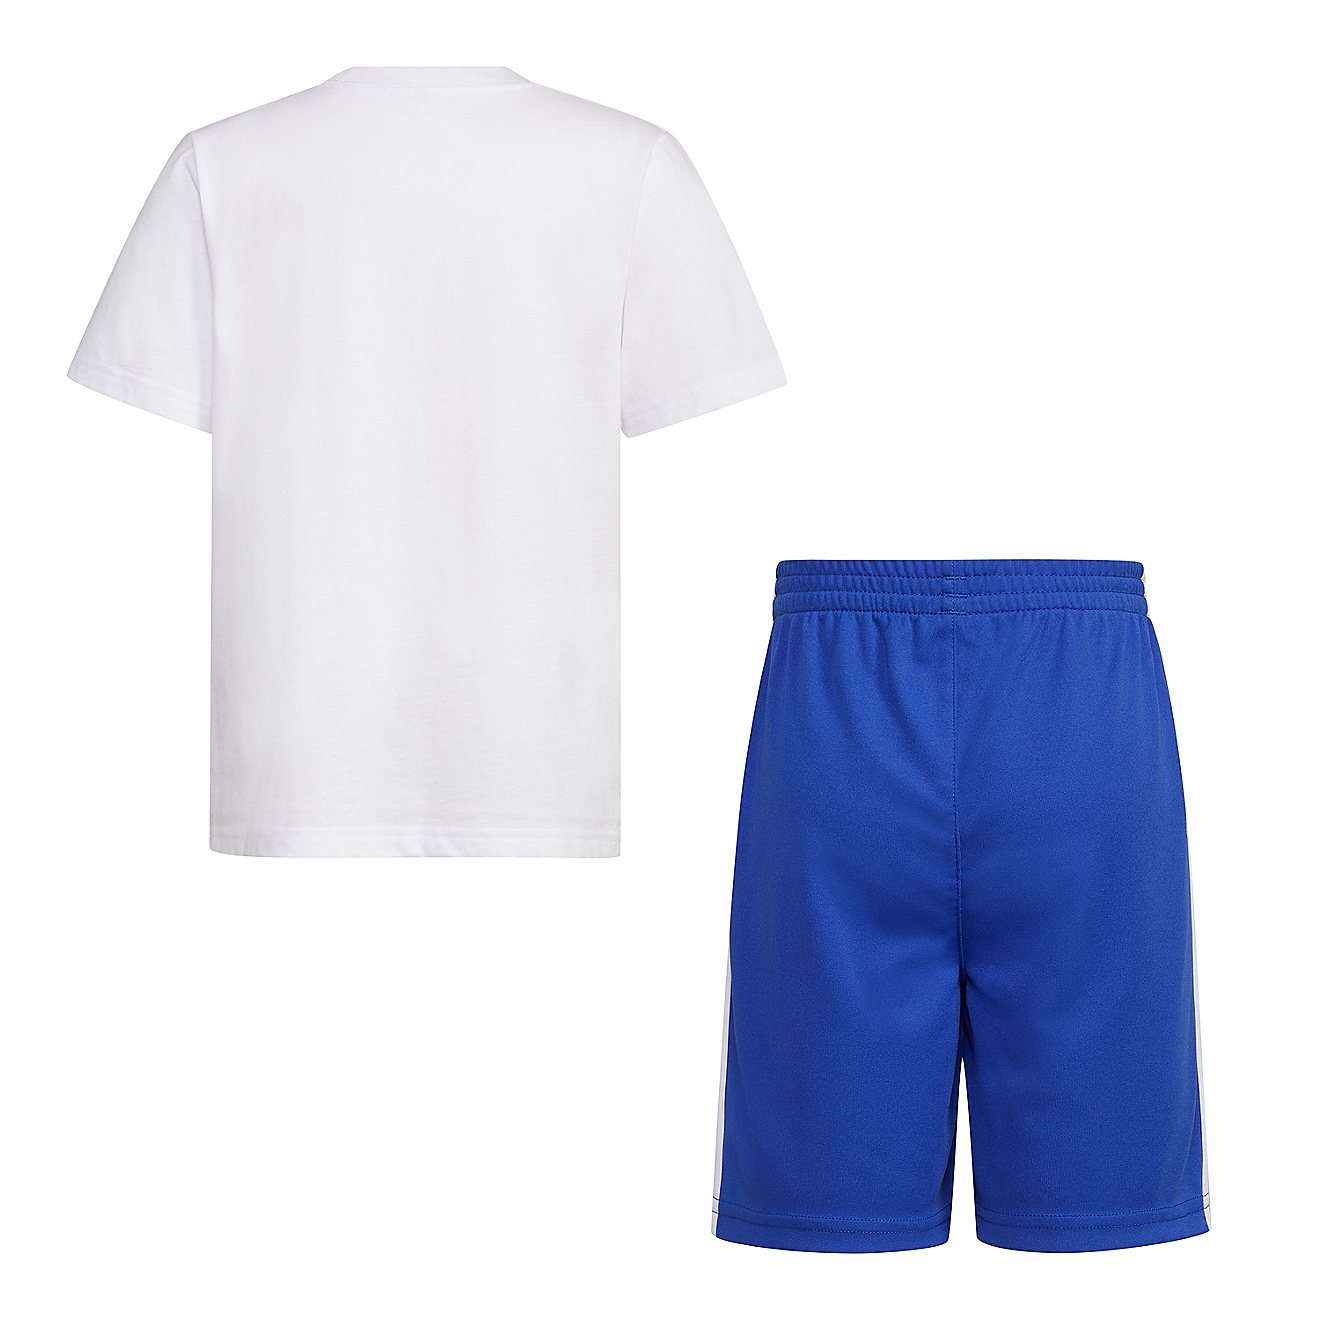 adidas 2-Piece Cotton Graphic T-shirt and Shorts Set | Academy